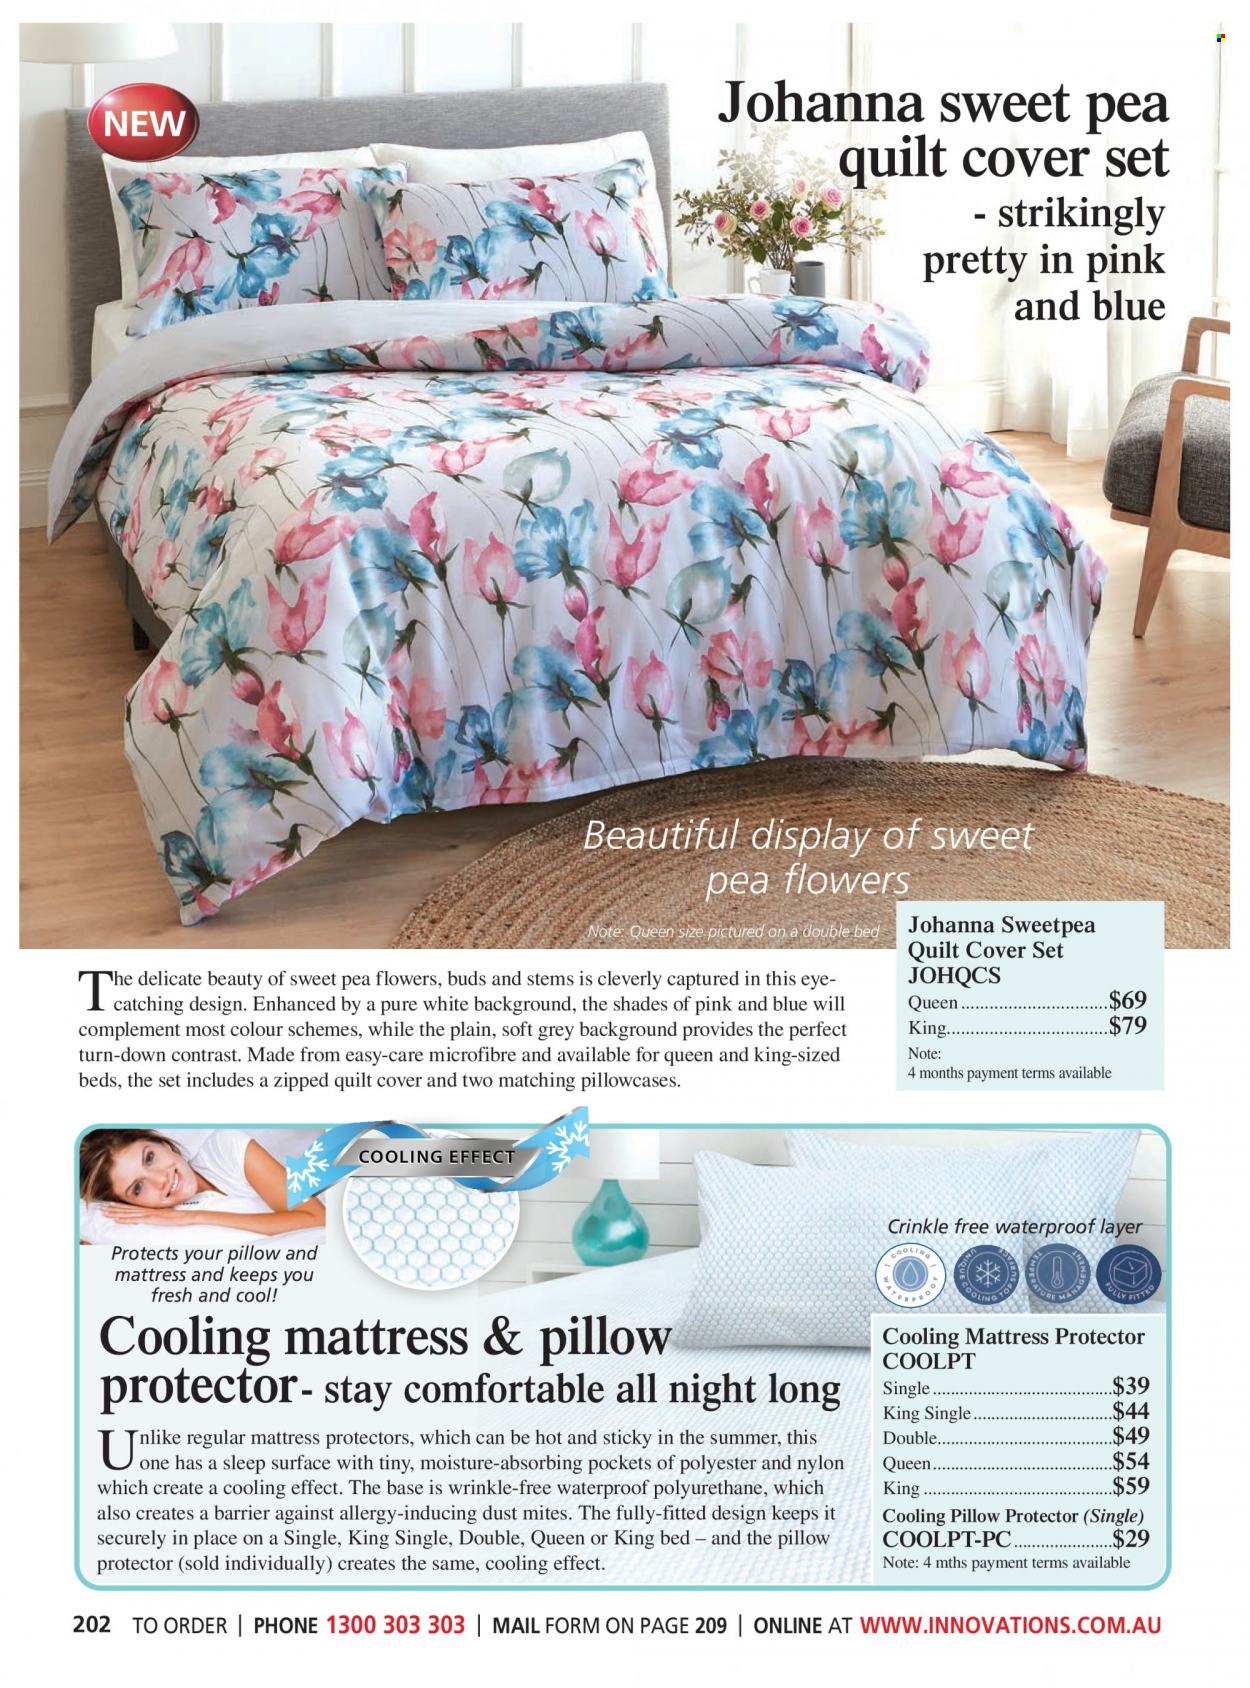 thumbnail - Innovations Catalogue - Sales products - pillow, pillowcase, quilt, mattress protector, quilt cover set. Page 202.